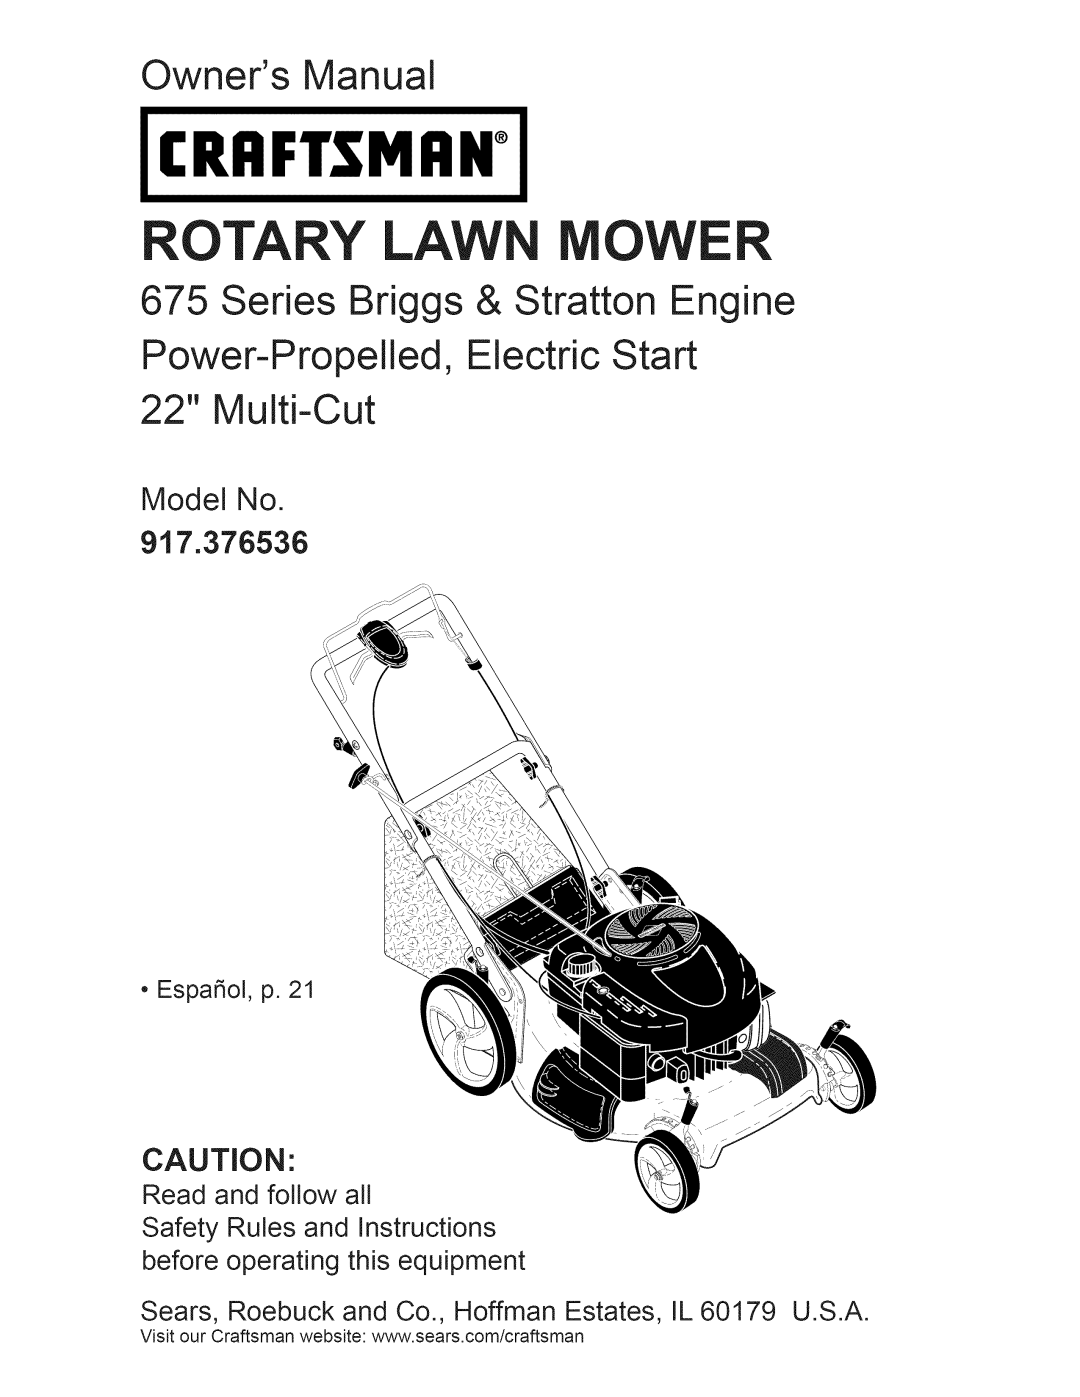 Craftsman 917.376536 manual Owners Manual, Series Briggs & Stratton Engine, Power-Propelled, Electric Start 22 Multi-Cut 